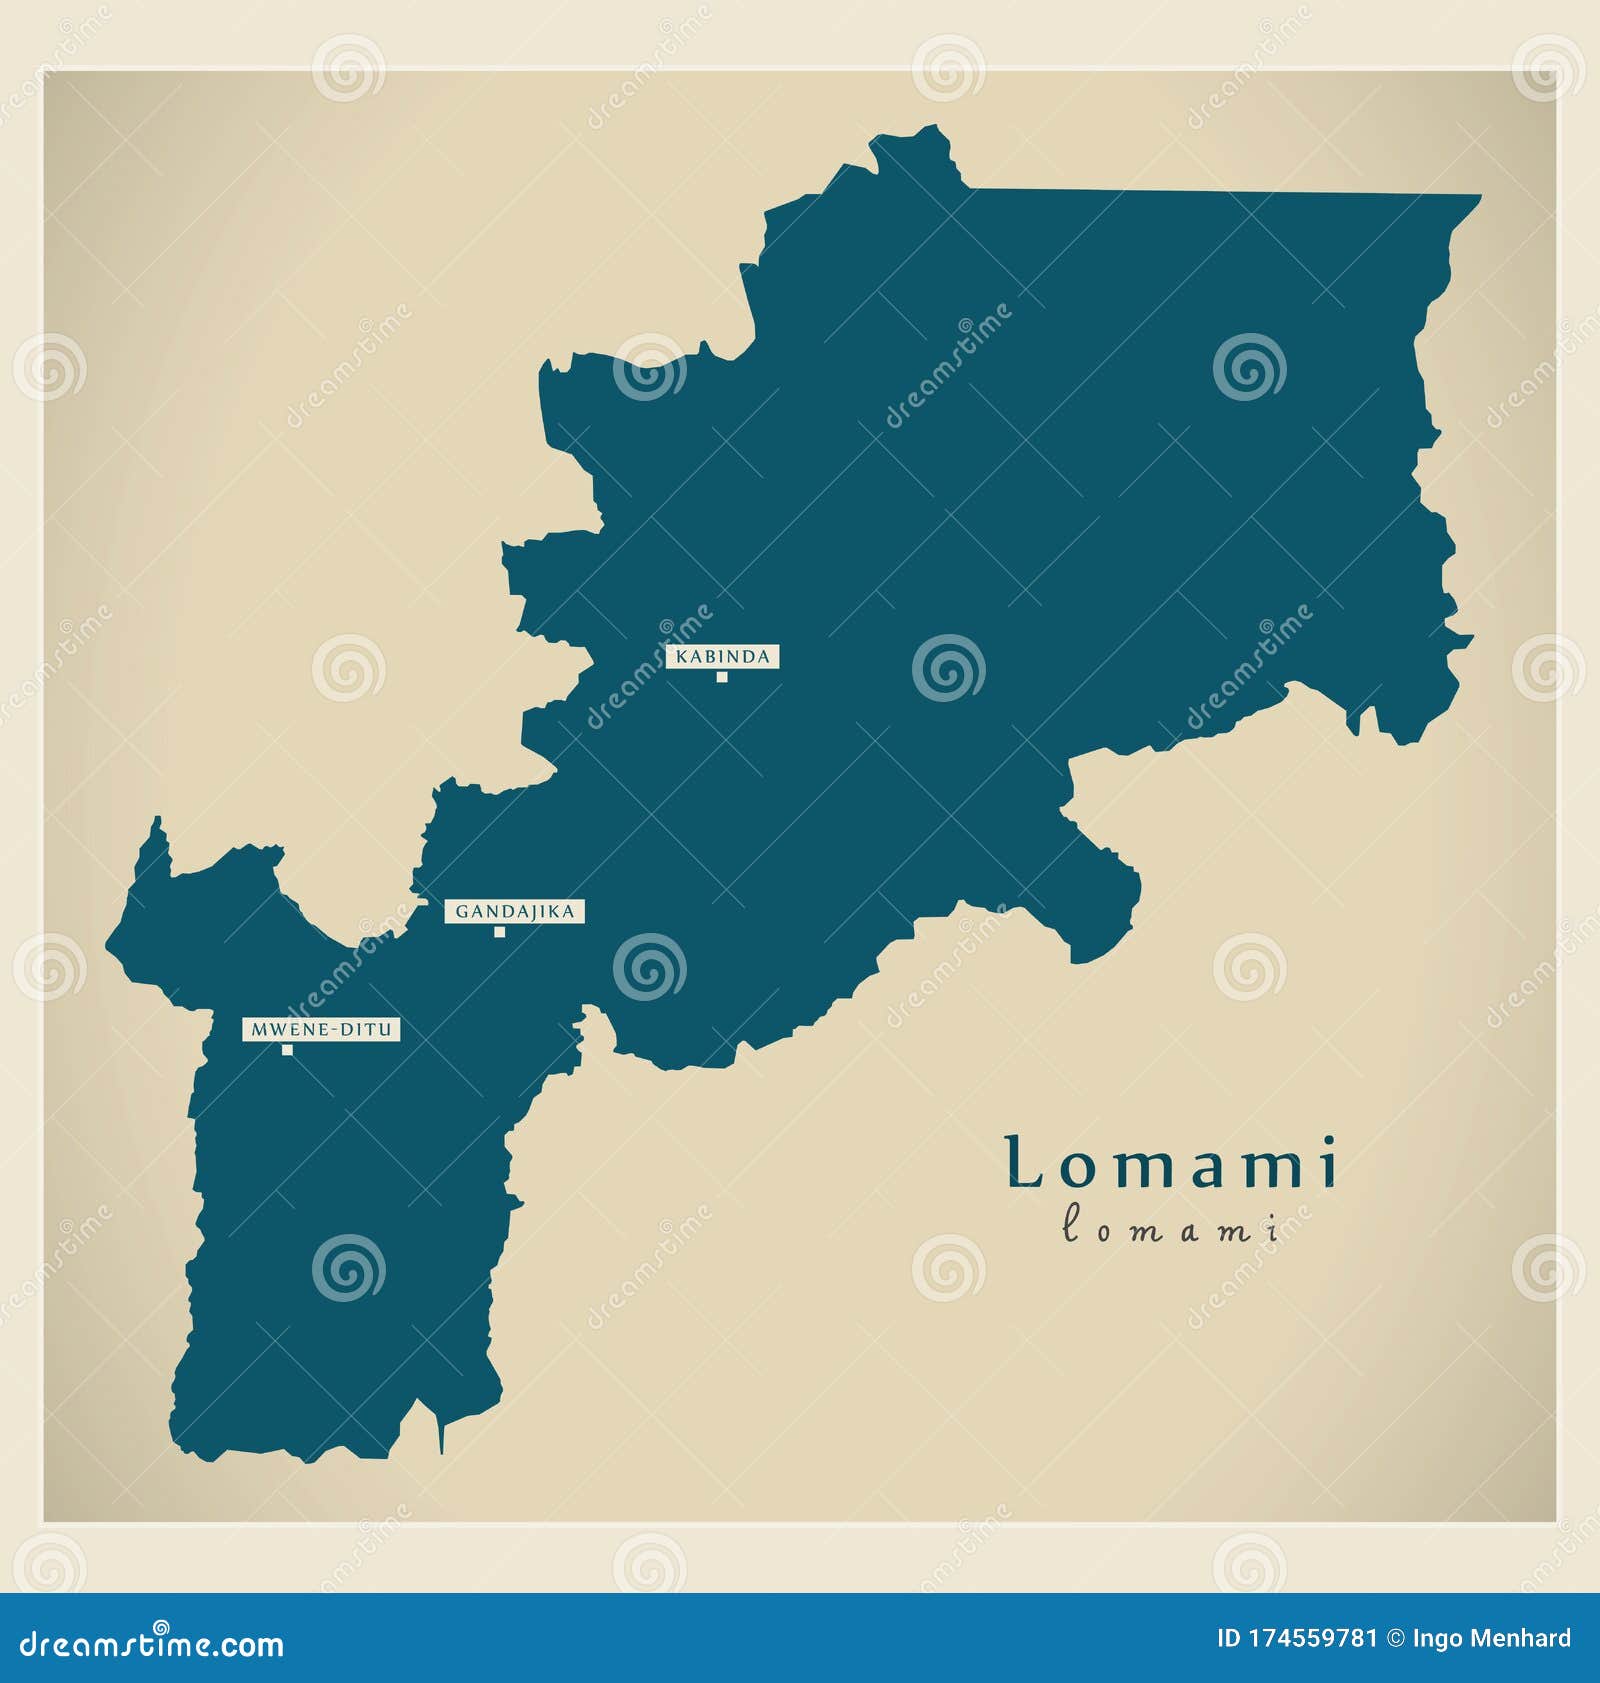 modern map - lomami province map of dr congo